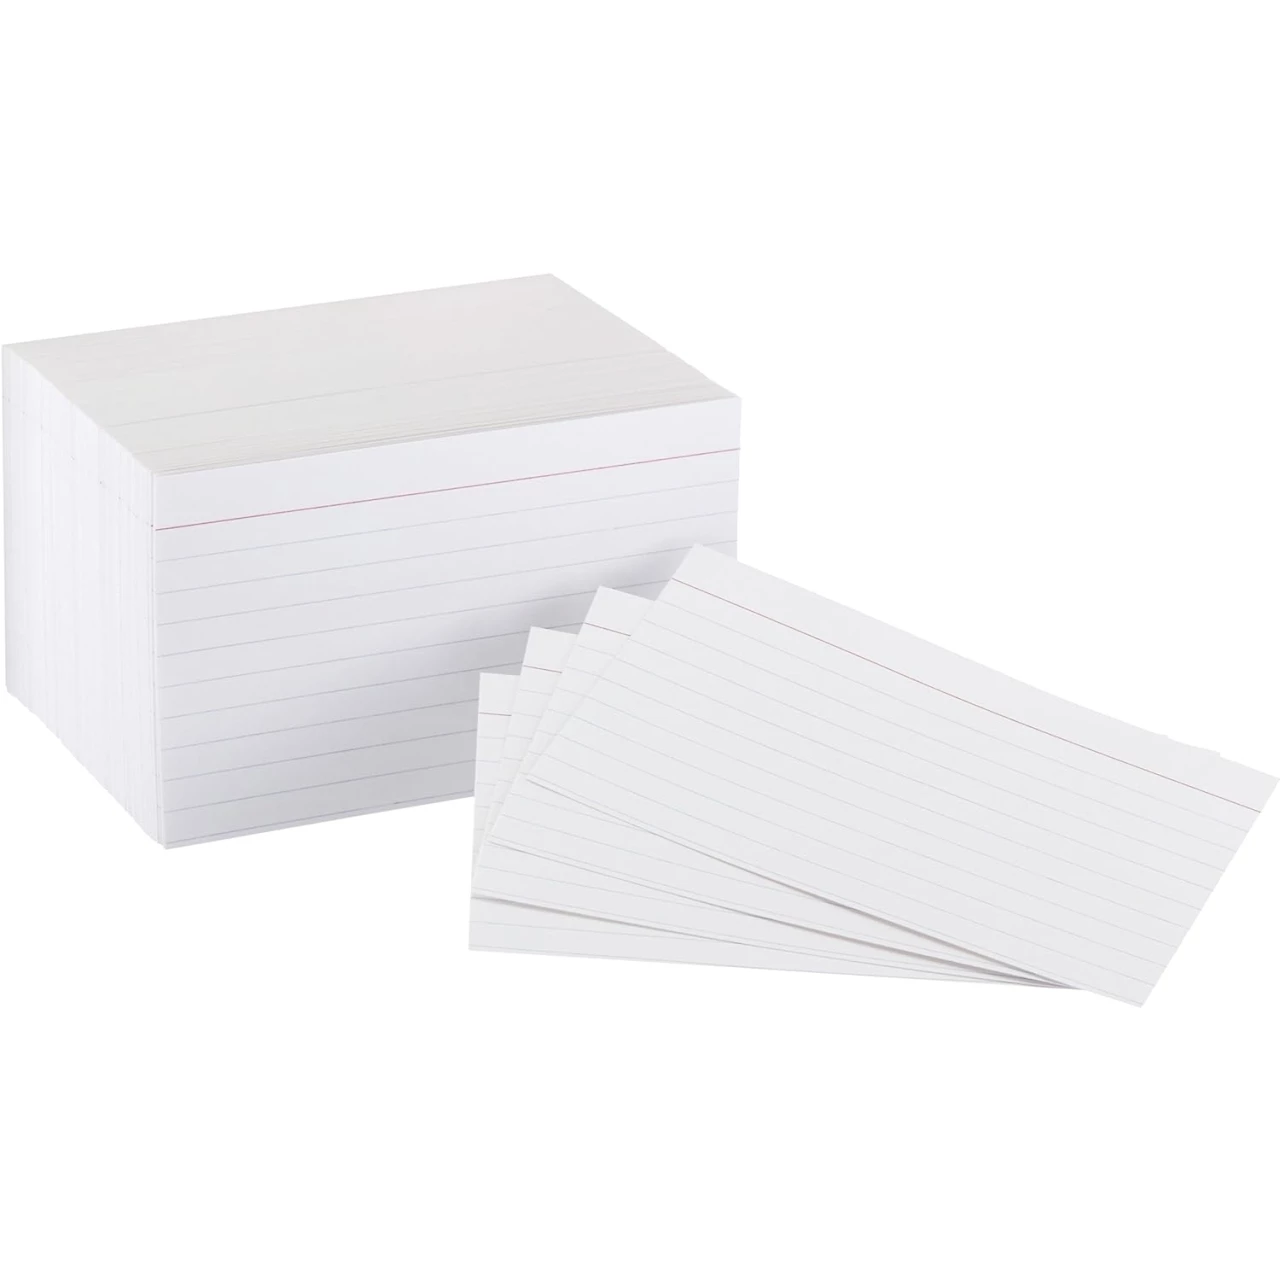 Amazon Basics Heavy Weight Ruled Lined Index Cards, 300 Count, 100 Pack of 3, White, 3 x 5 Inch Card